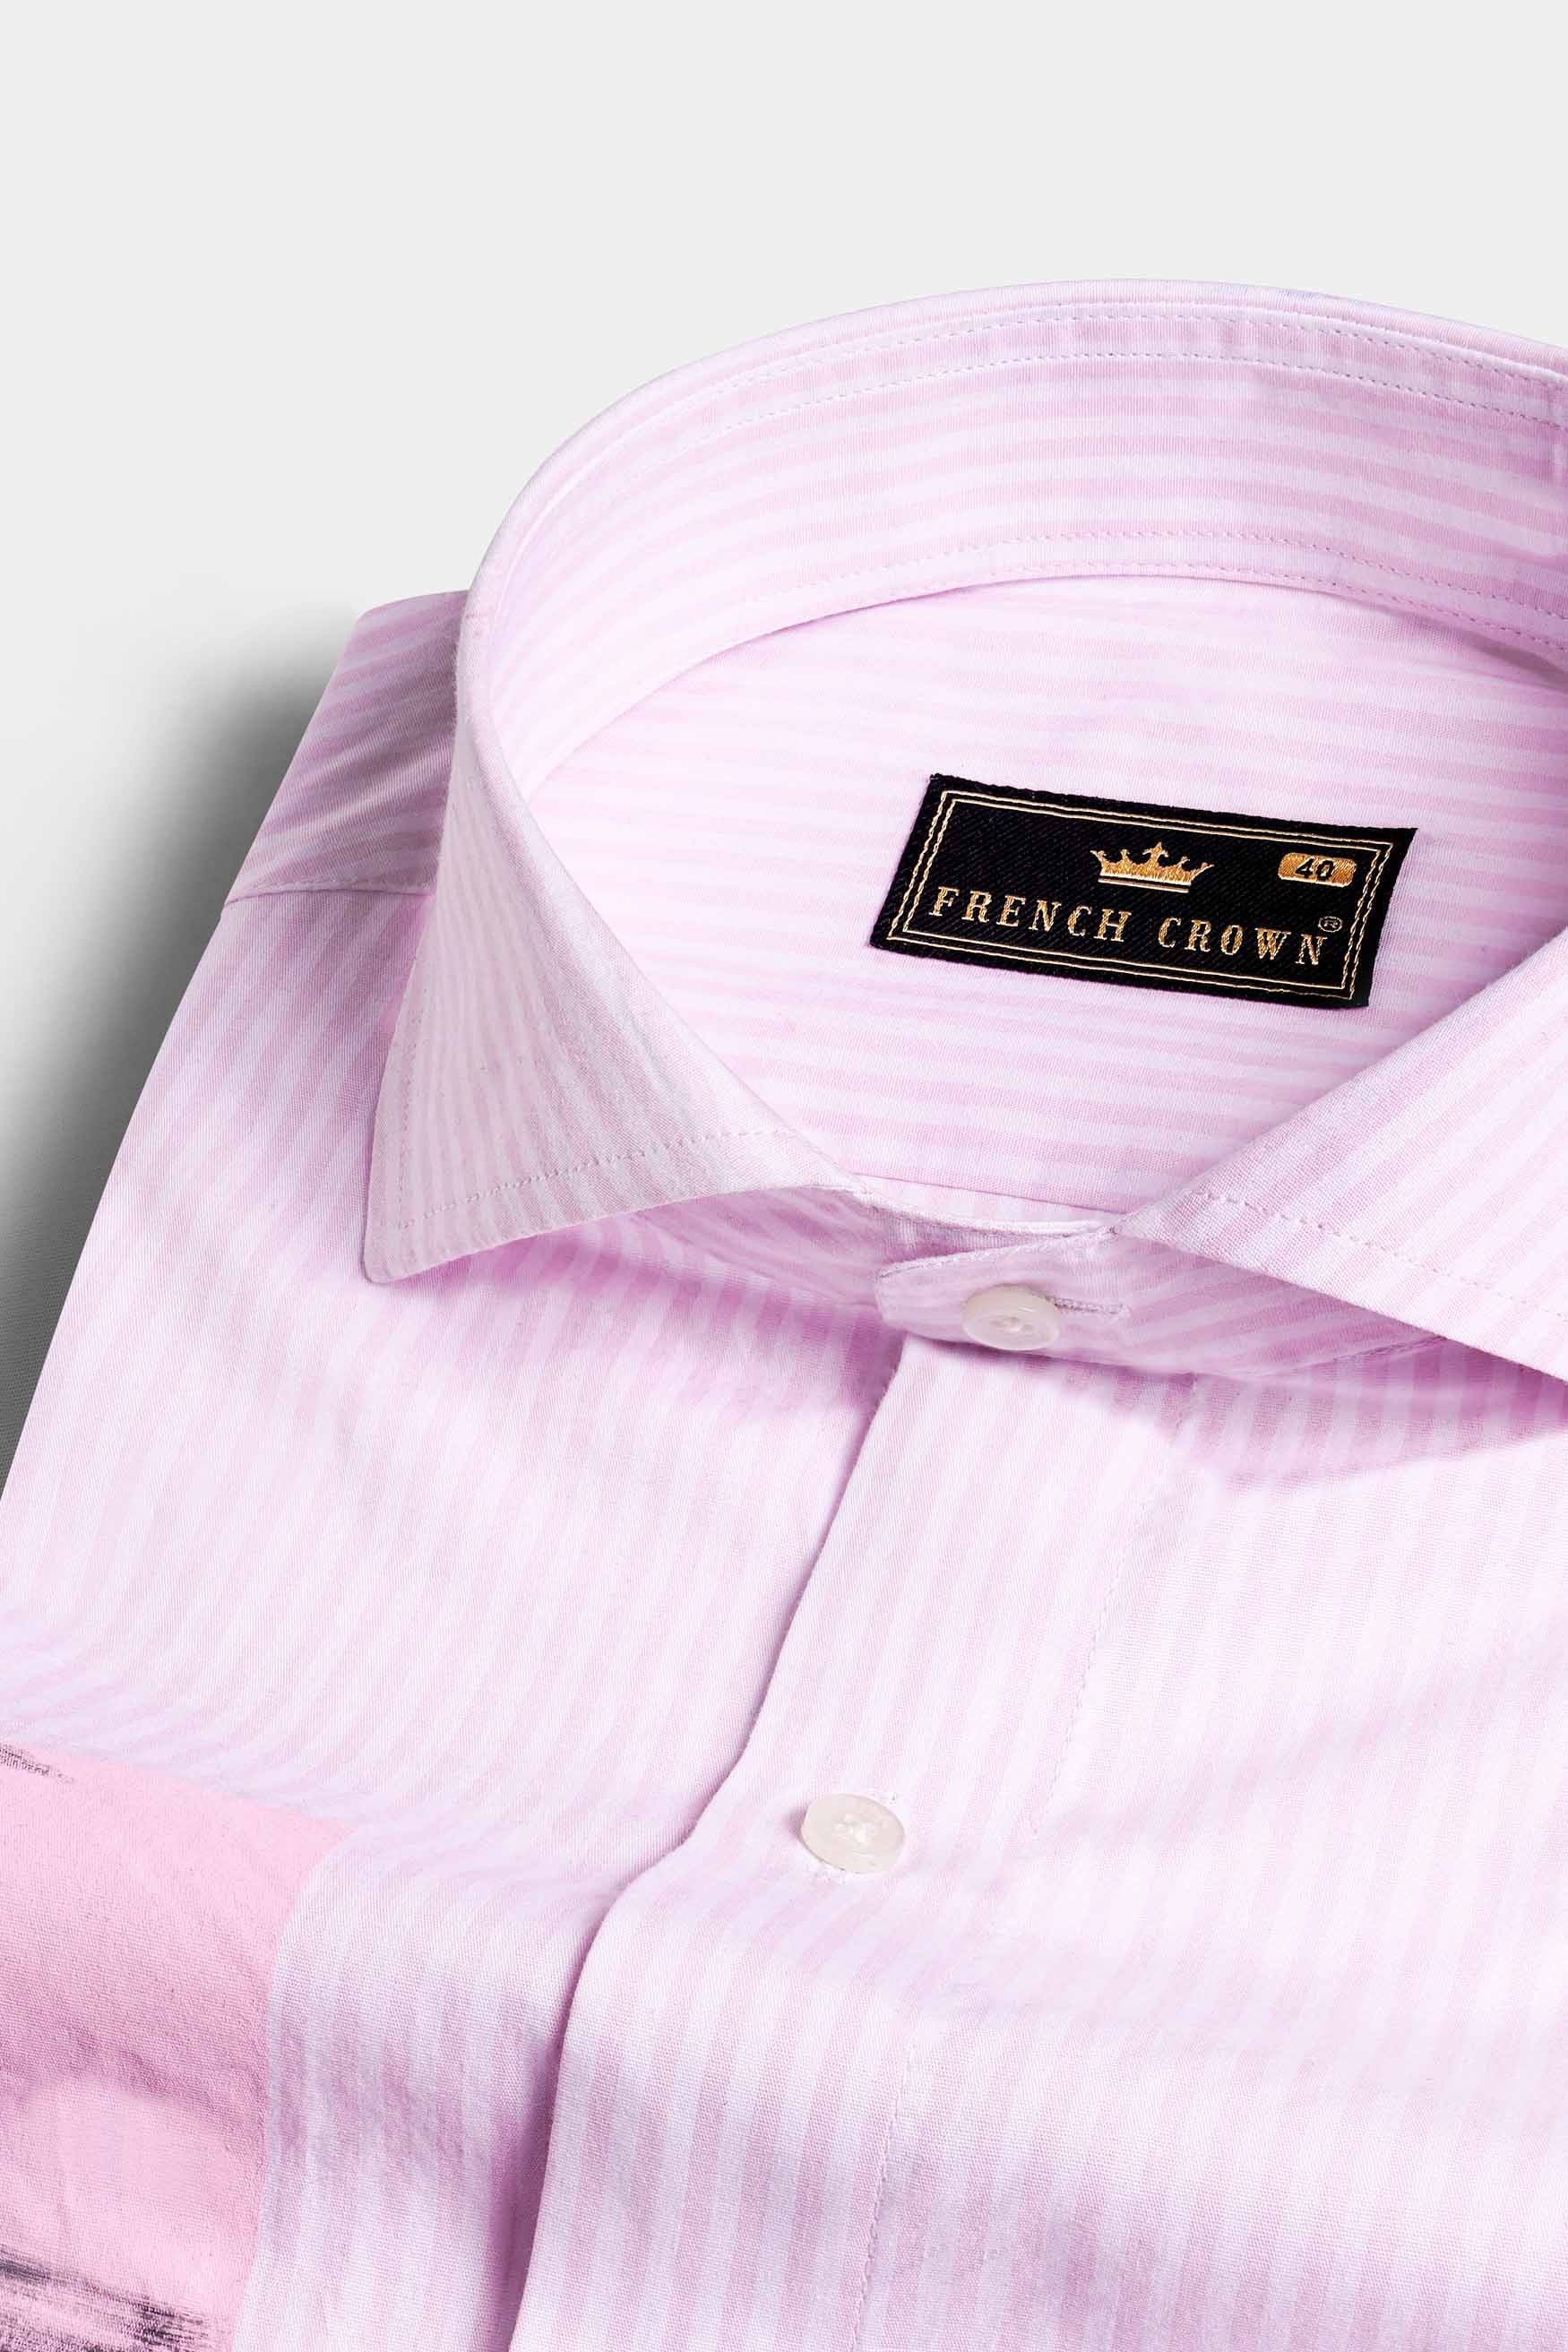 Languid Pink and White Pin-Striped with Hand Painted Premium Cotton Designer Shirt 6339-CA-ART-38, 6339-CA-ART-H-38, 6339-CA-ART-39, 6339-CA-ART-H-39, 6339-CA-ART-40, 6339-CA-ART-H-40, 6339-CA-ART-42, 6339-CA-ART-H-42, 6339-CA-ART-44, 6339-CA-ART-H-44, 6339-CA-ART-46, 6339-CA-ART-H-46, 6339-CA-ART-48, 6339-CA-ART-H-48, 6339-CA-ART-50, 6339-CA-ART-H-50, 6339-CA-ART-52, 6339-CA-ART-H-52